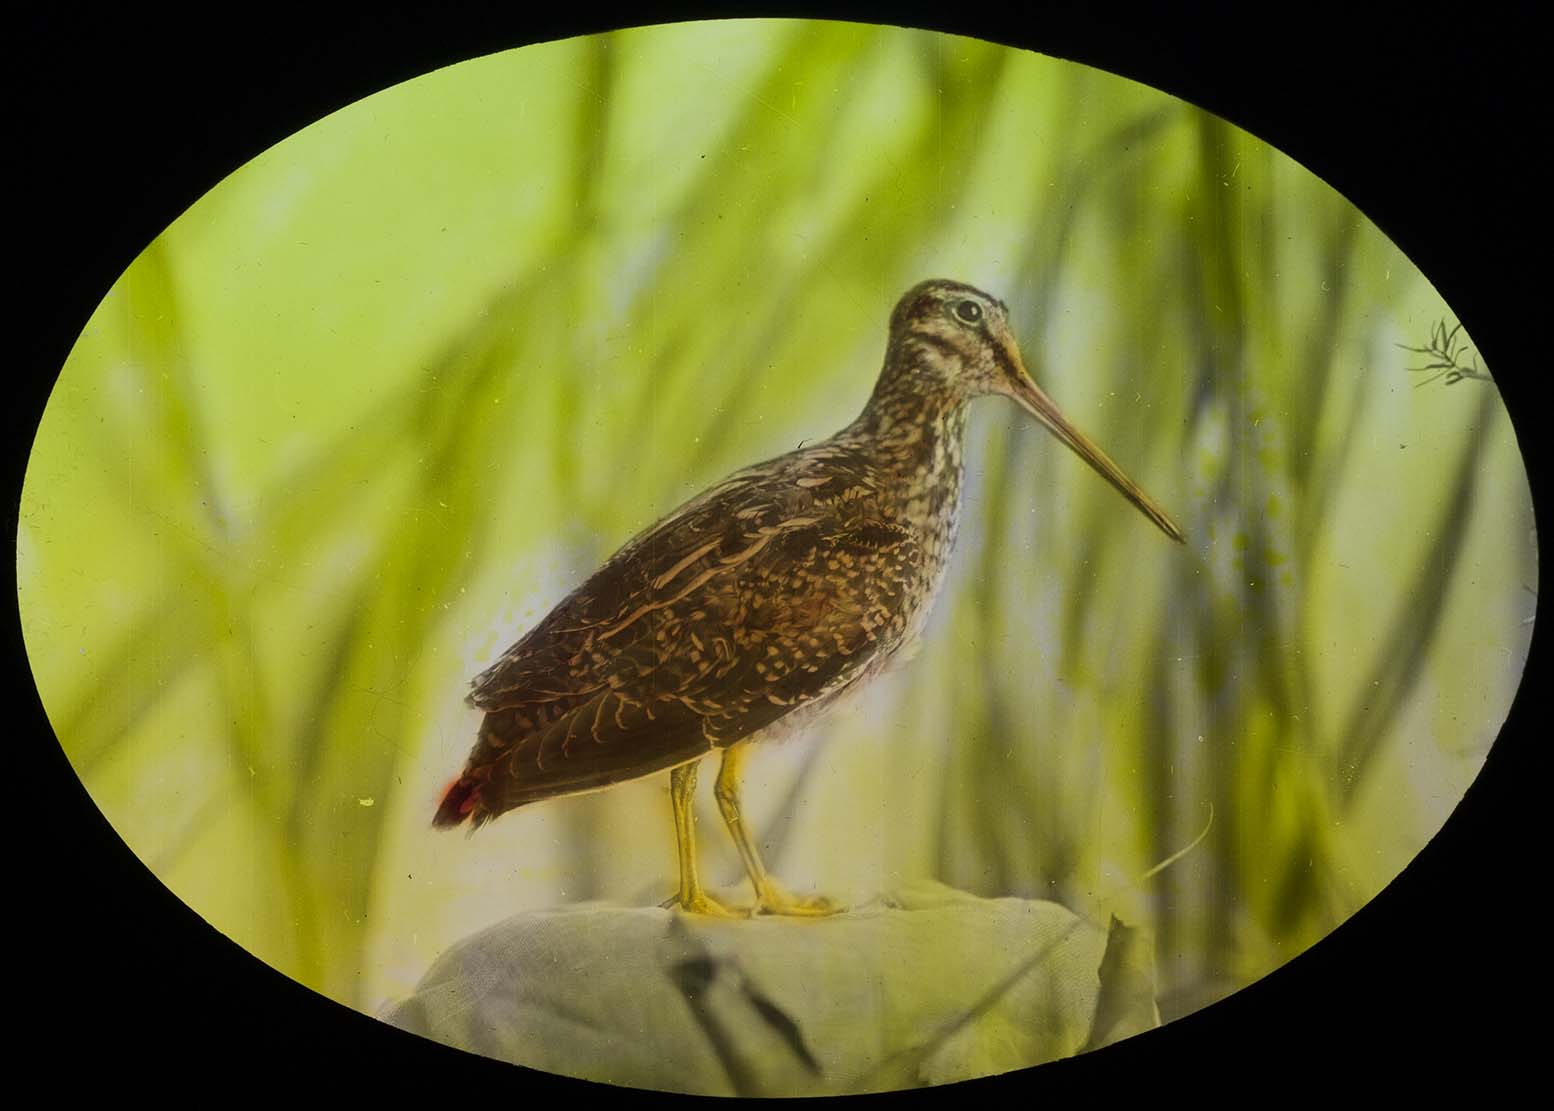 Lantern slide and photograph of a Wilson's Snipe